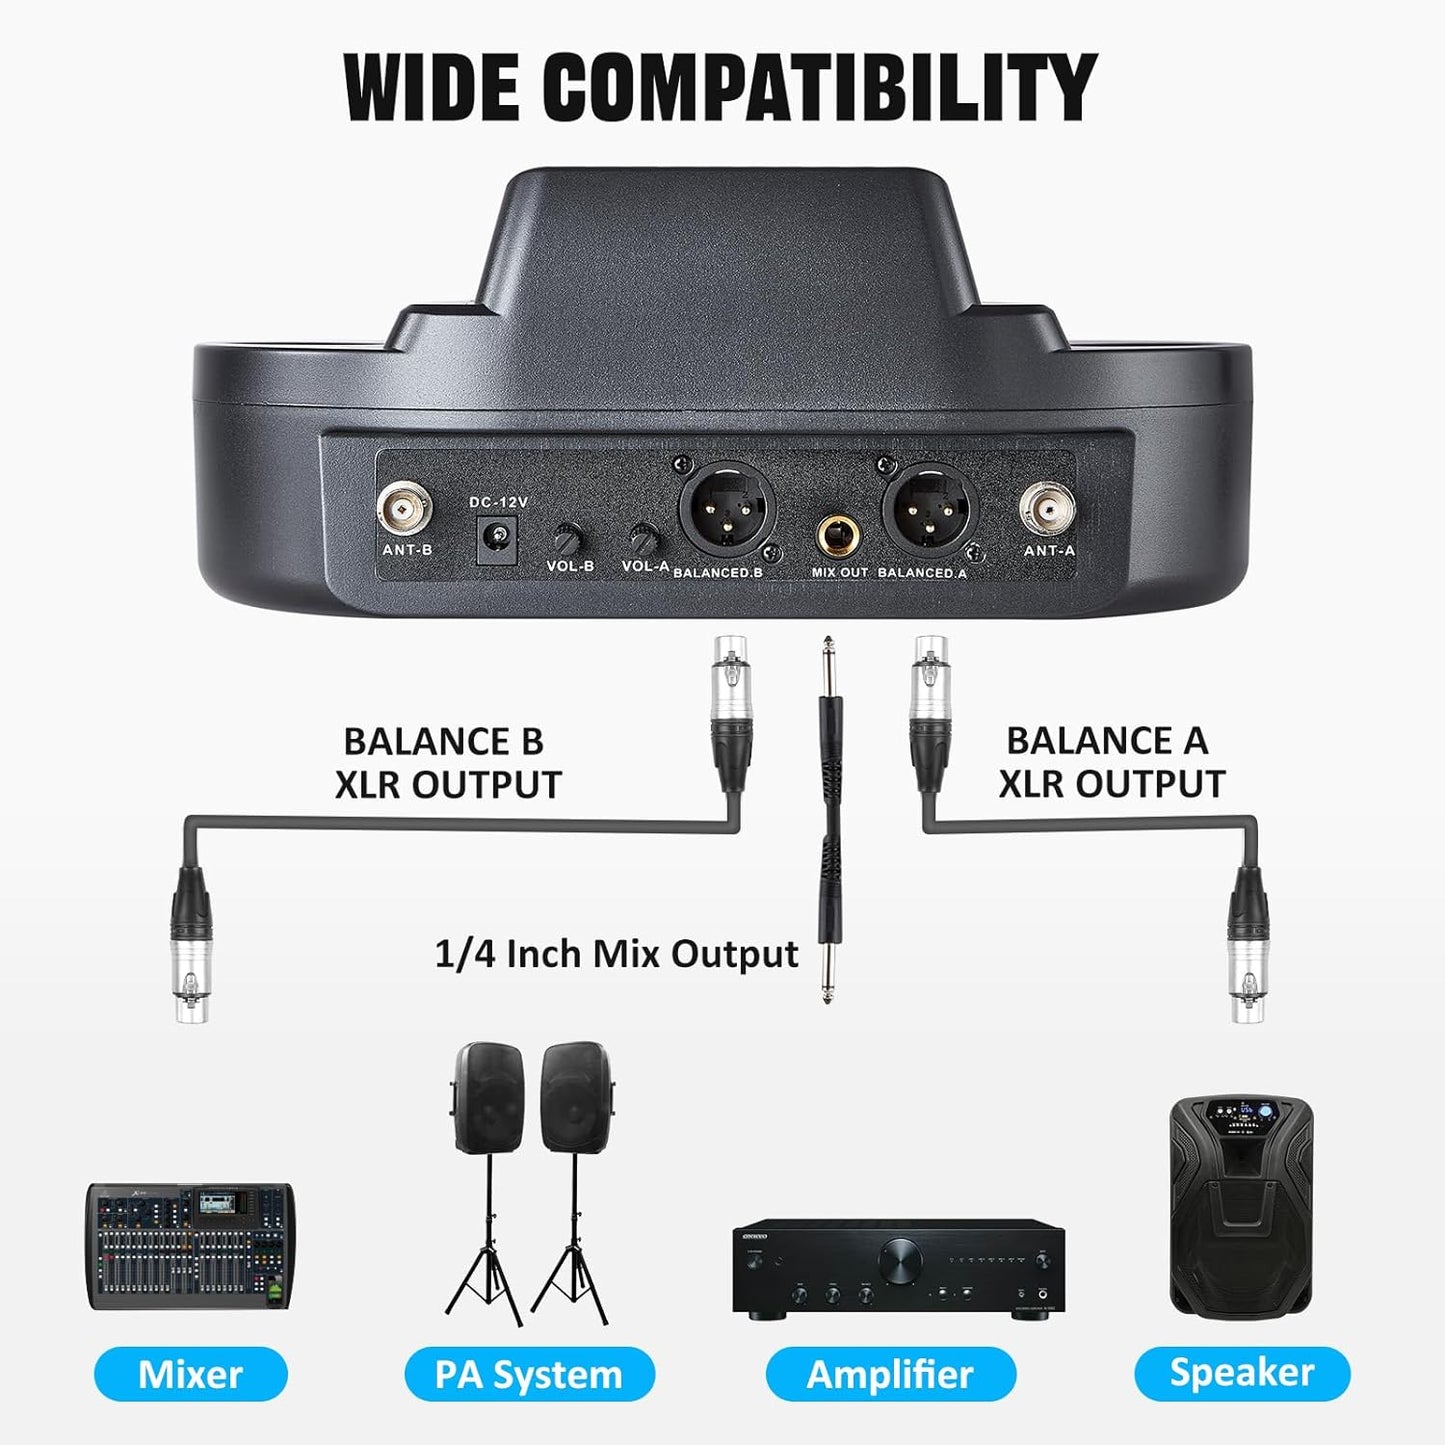 Boeska Rechargeable Handheld Wireless Microphone System UHF Dual Professional Cordless Mic for Home Karaoke, Meeting, Party, Conference, Stage